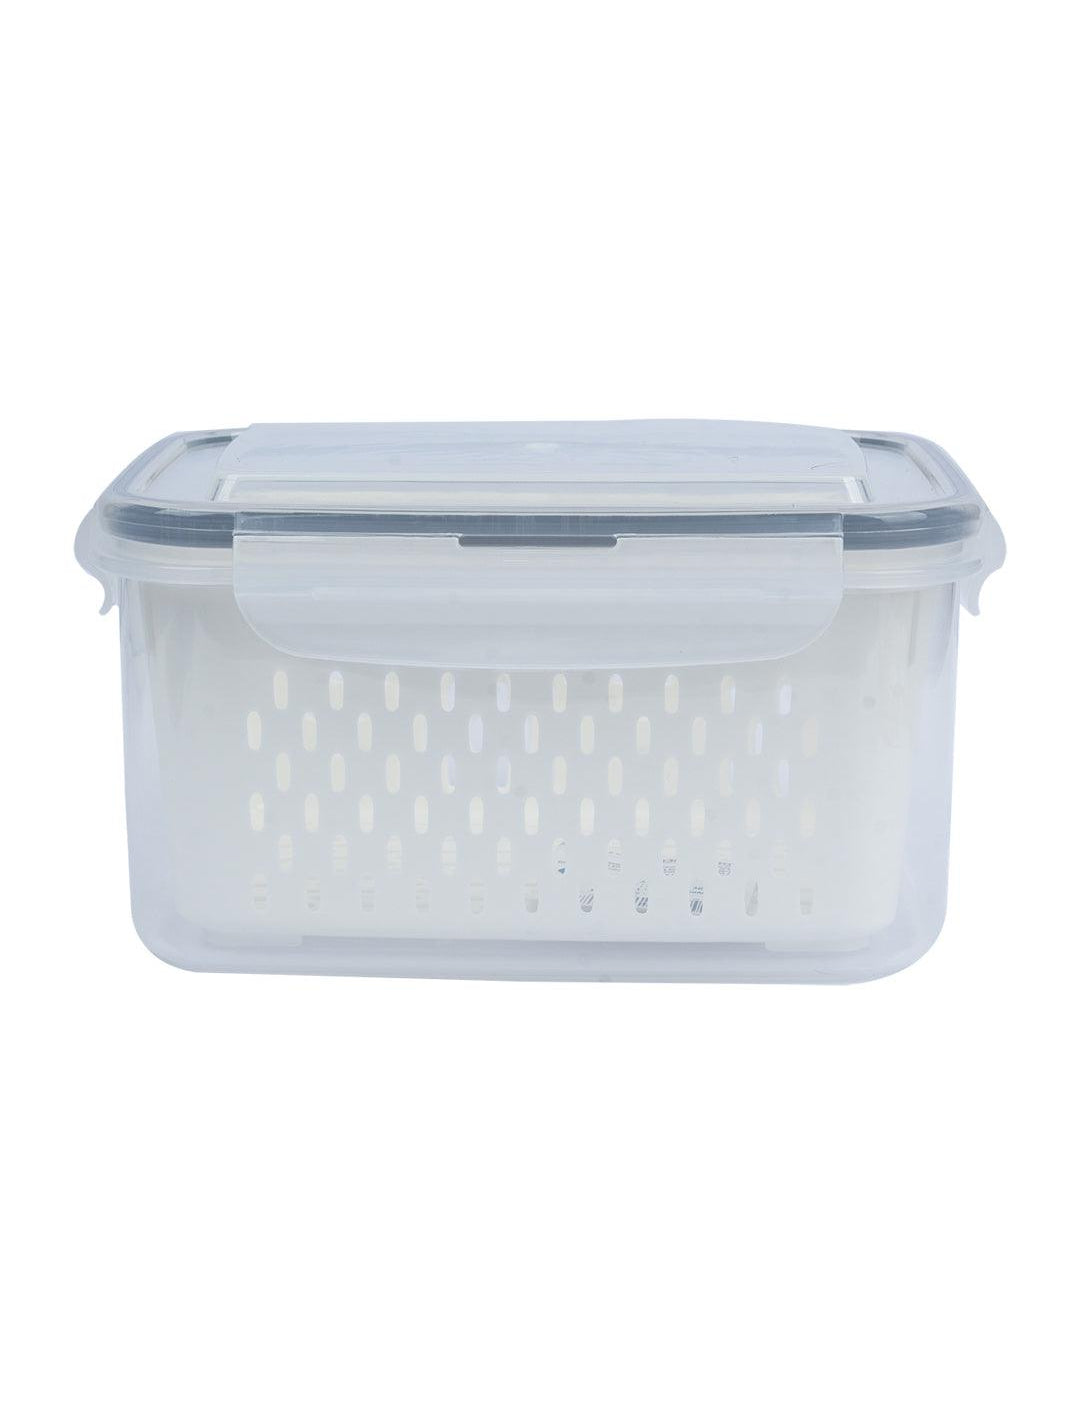 Kitchen Food Storage Containers - 800ml, Plastic